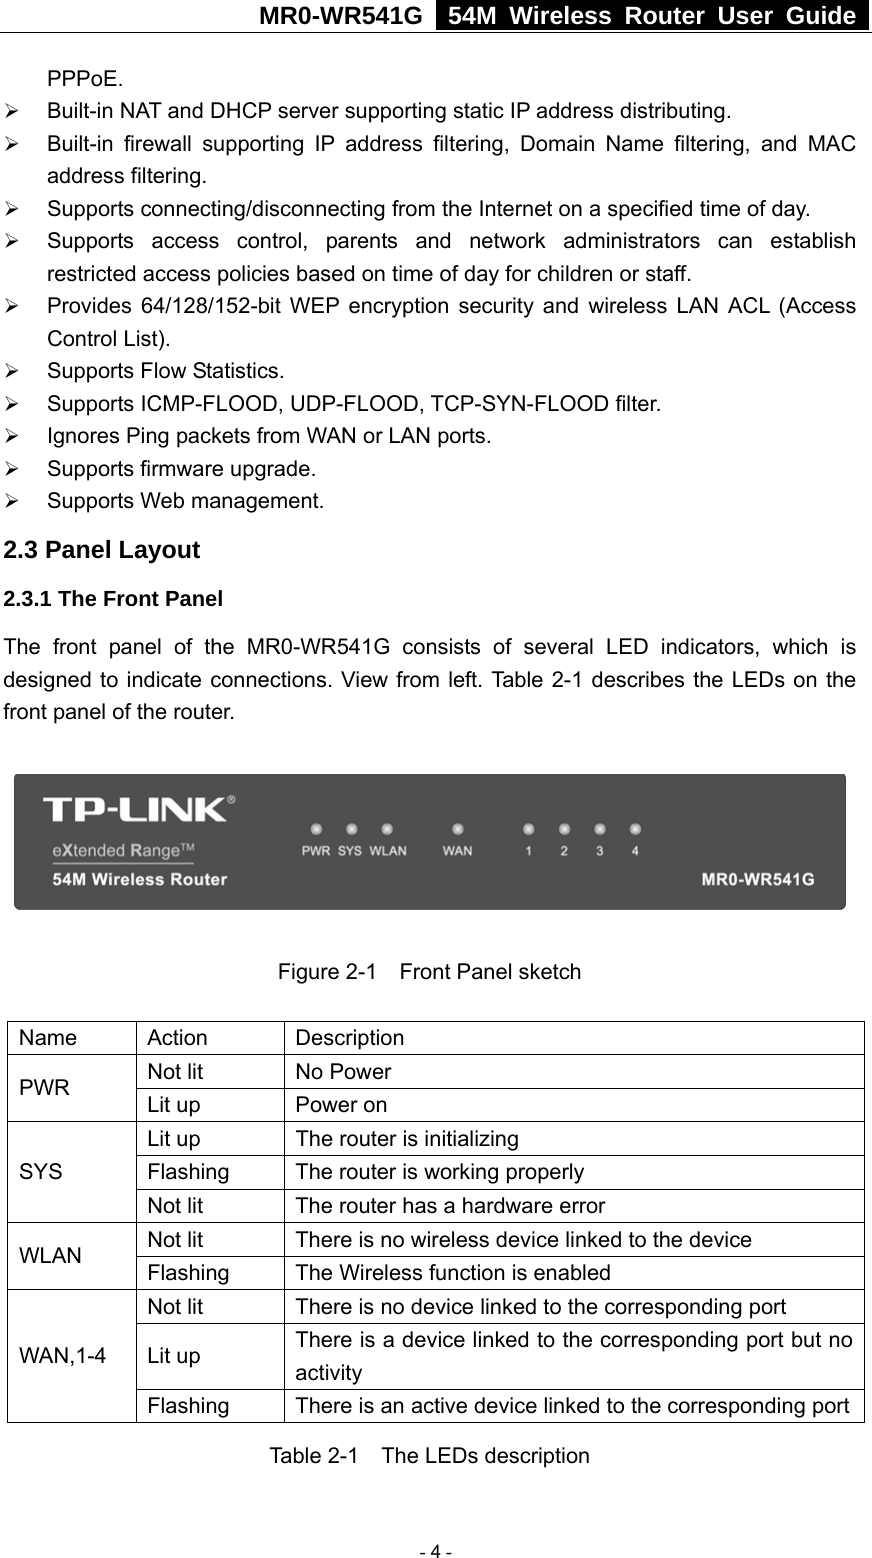 MR0-WR541G   54M Wireless Router User Guide  PPPoE. ¾ Built-in NAT and DHCP server supporting static IP address distributing. ¾ Built-in firewall supporting IP address filtering, Domain Name filtering, and MAC address filtering. ¾ Supports connecting/disconnecting from the Internet on a specified time of day. ¾ Supports access control, parents and network administrators can establish restricted access policies based on time of day for children or staff. ¾ Provides 64/128/152-bit WEP encryption security and wireless LAN ACL (Access Control List). ¾ Supports Flow Statistics. ¾ Supports ICMP-FLOOD, UDP-FLOOD, TCP-SYN-FLOOD filter. ¾ Ignores Ping packets from WAN or LAN ports. ¾ Supports firmware upgrade. ¾ Supports Web management. 2.3 Panel Layout 2.3.1 The Front Panel The front panel of the MR0-WR541G consists of several LED indicators, which is designed to indicate connections. View from left. Table 2-1 describes the LEDs on the front panel of the router.      Figure 2-1    Front Panel sketch  Name Action  Description Not lit  No Power PWR  Lit up  Power on Lit up  The router is initializing Flashing  The router is working properly SYS Not lit  The router has a hardware error Not lit  There is no wireless device linked to the device WLAN  Flashing  The Wireless function is enabled Not lit  There is no device linked to the corresponding port Lit up  There is a device linked to the corresponding port but no activity WAN,1-4 Flashing  There is an active device linked to the corresponding portTable 2-1    The LEDs description  - 4 - 